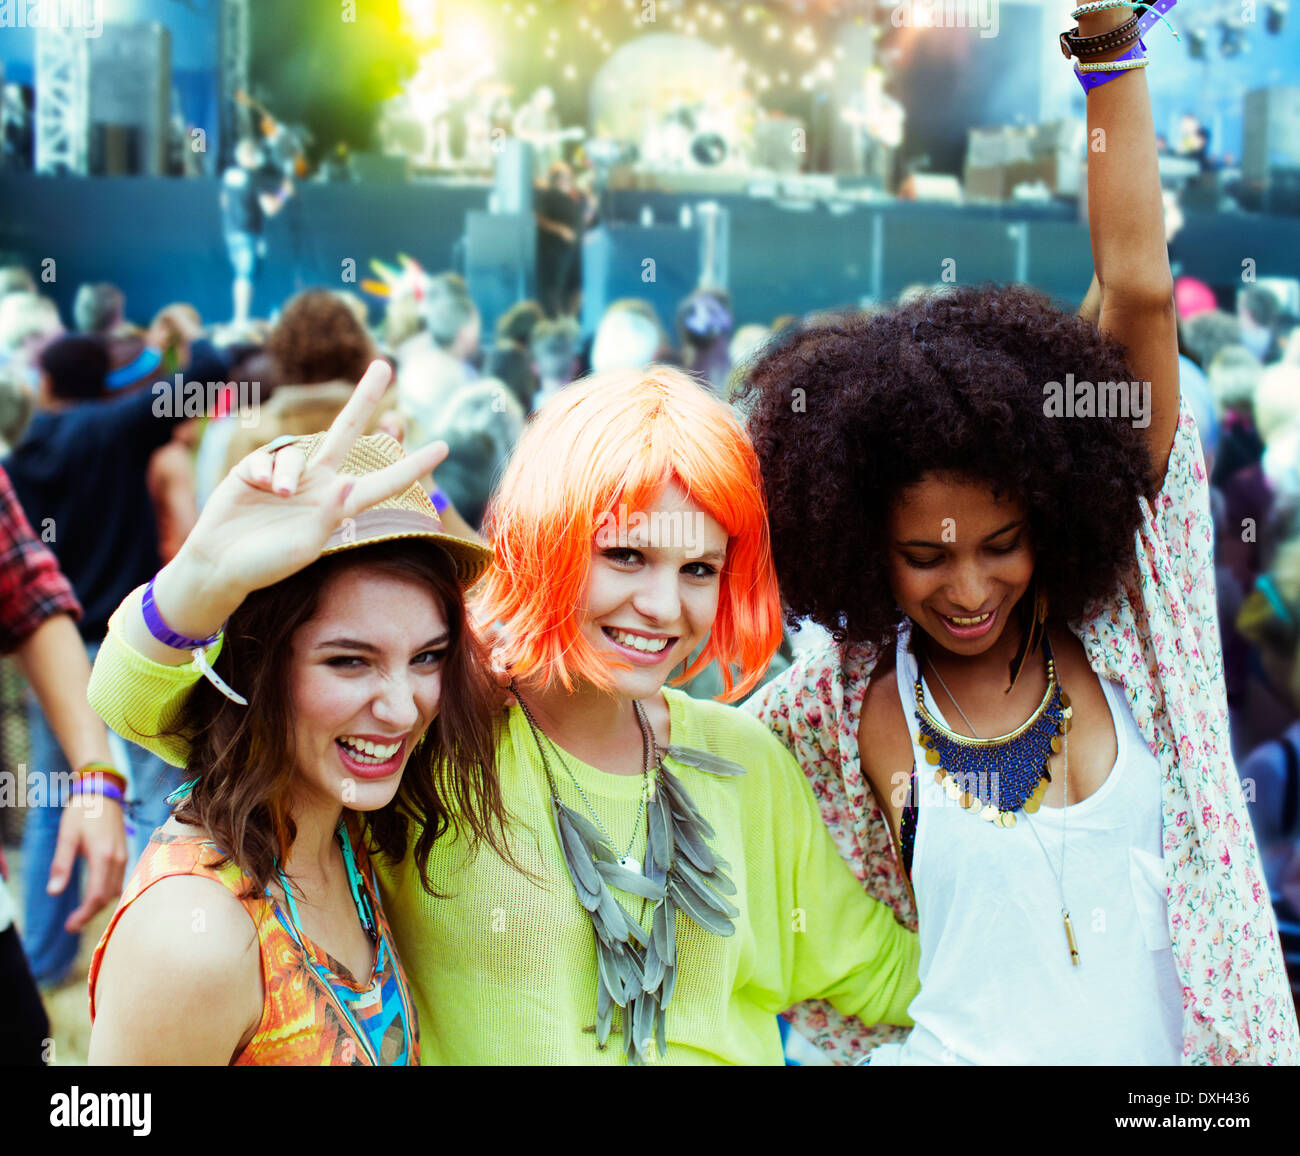 Portrait of cheering friends at music festival Stock Photo